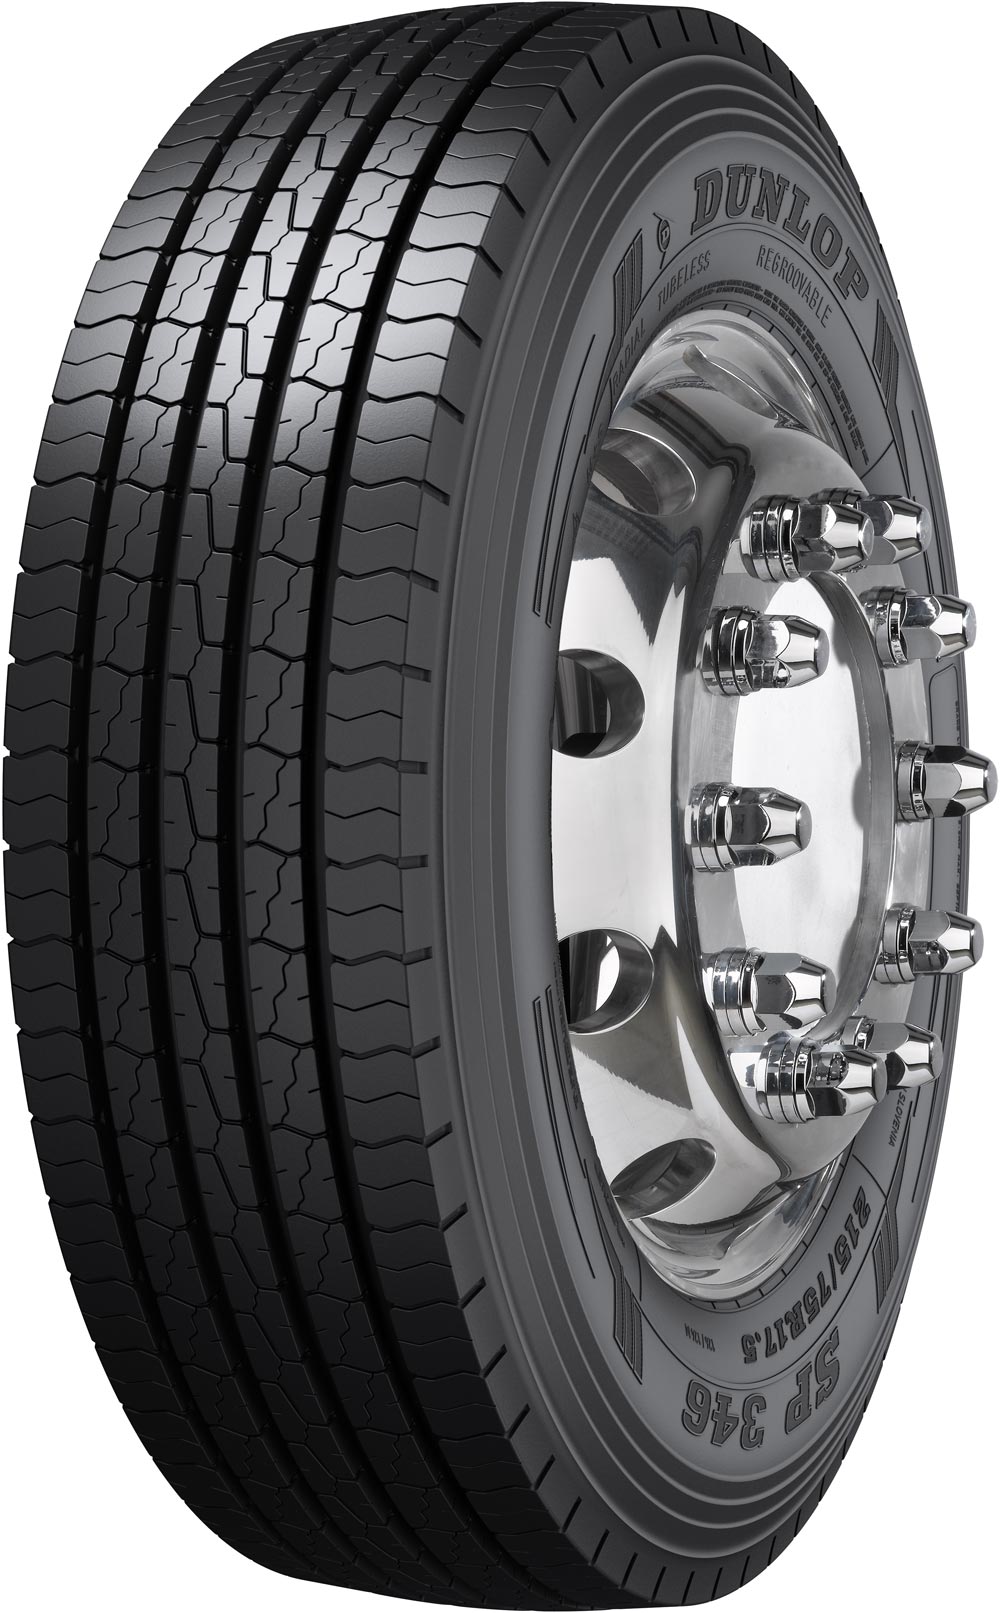 product_type-heavy_tires DUNLOP SP346 235/75 R17.5 132